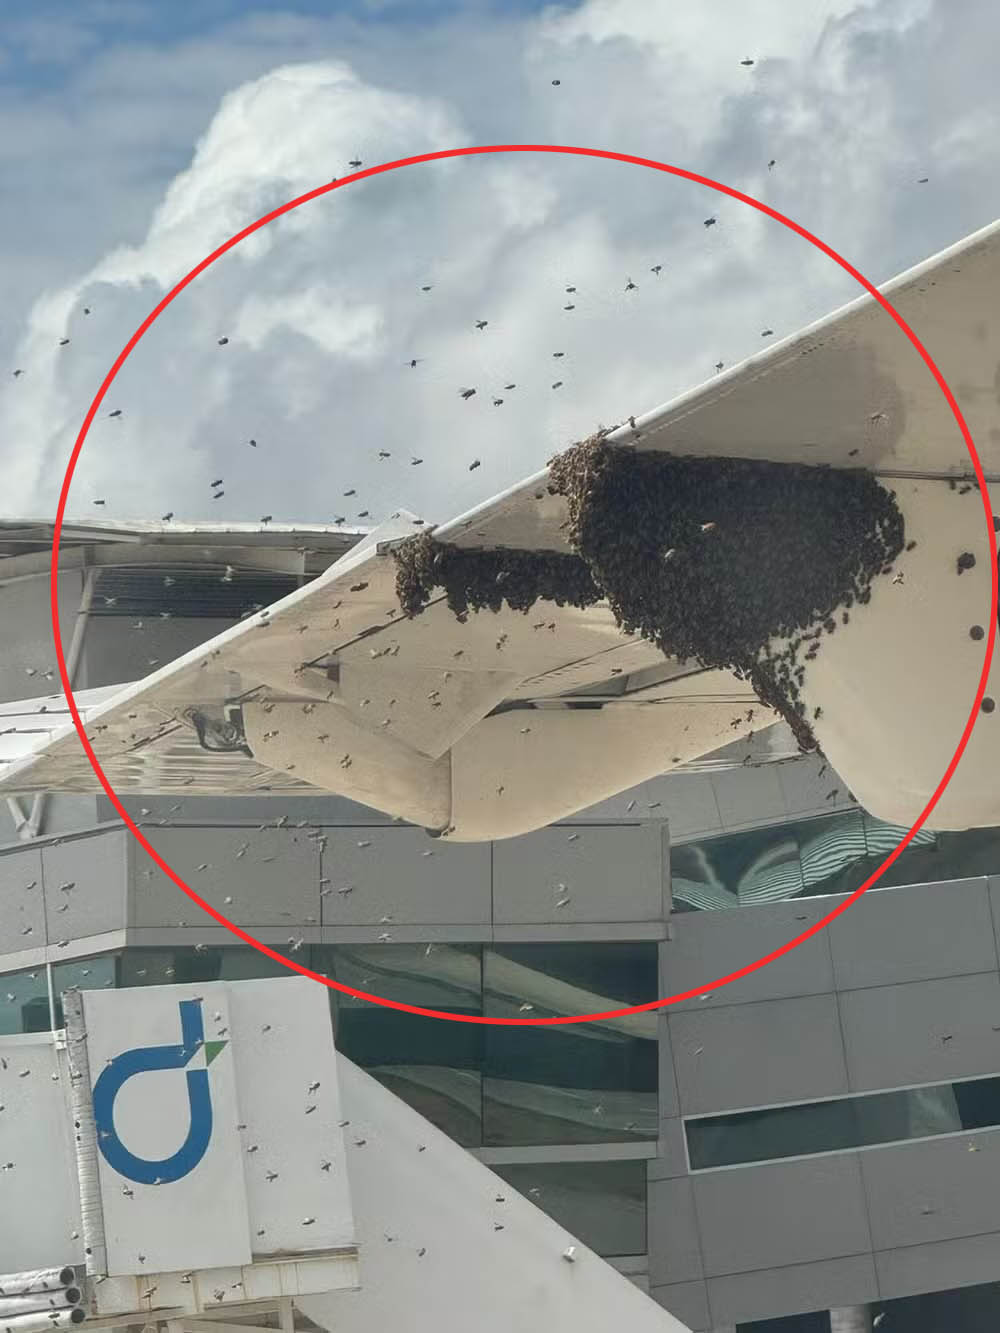 The bee’s swarming the wing of the plane left passengers stranded on tarmac for over an hour, in Fernando de Noronha, Brazil, and landed in Natal.